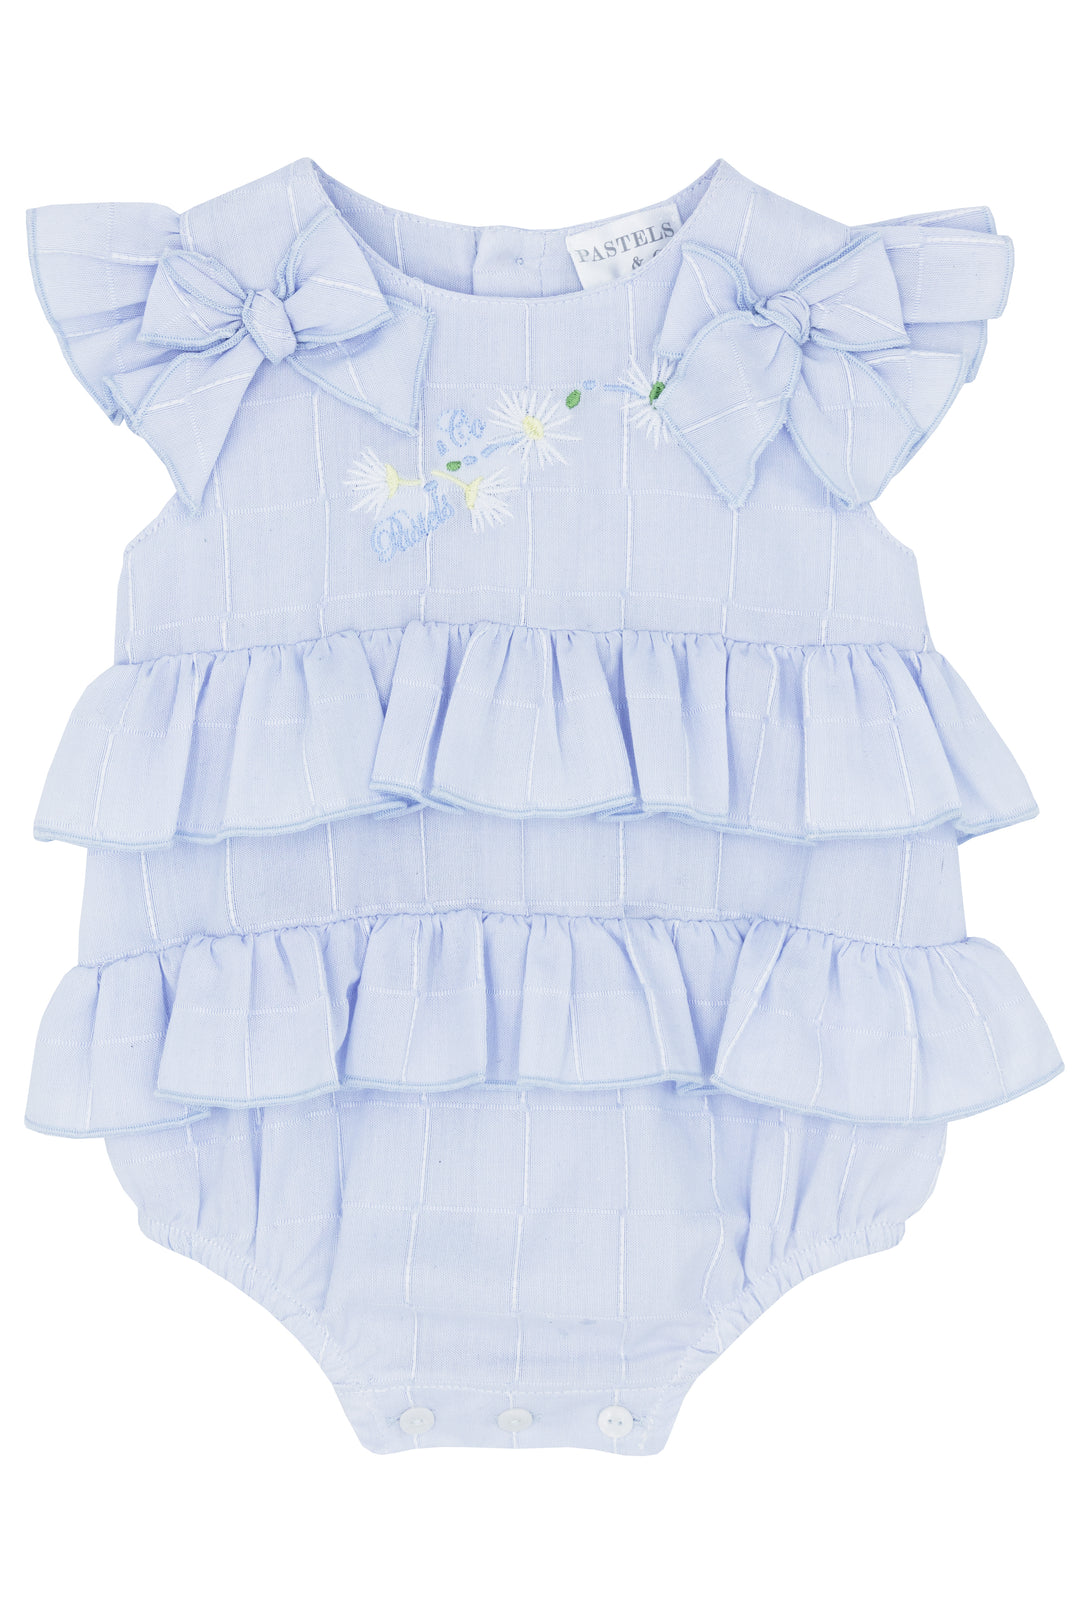 Pastels & Co "Callie" Blue Frilled Shortie | Millie and John